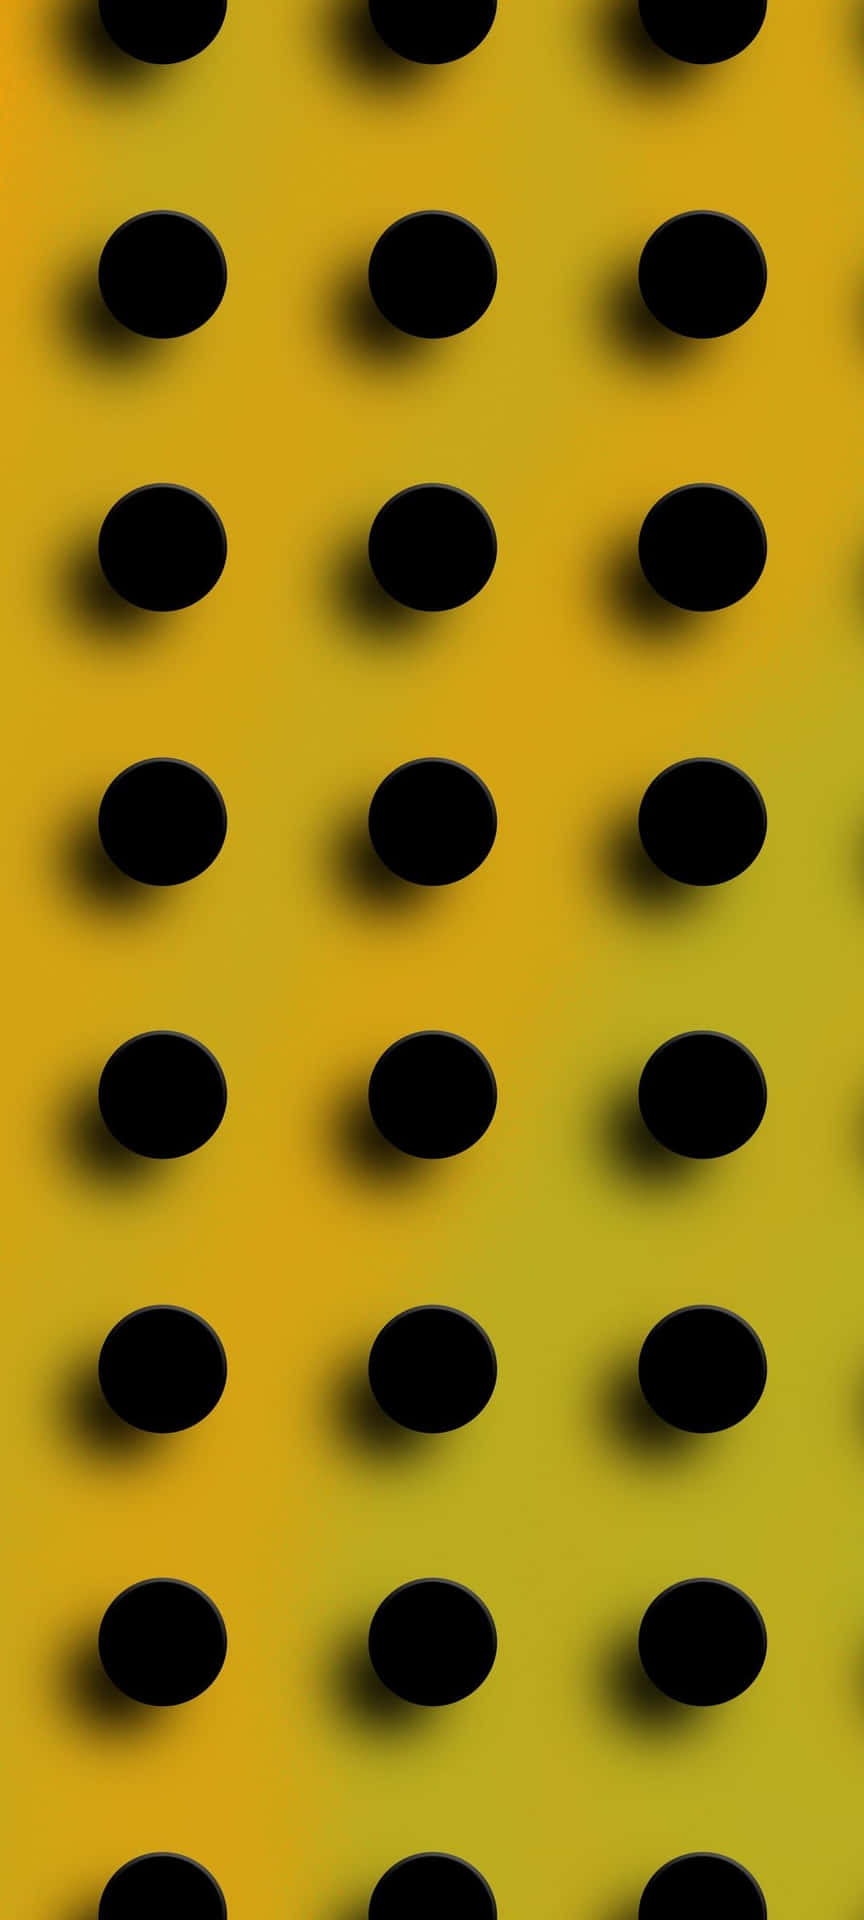 Abstract View of an Infinite Stretch of Tiny Black Dots Wallpaper